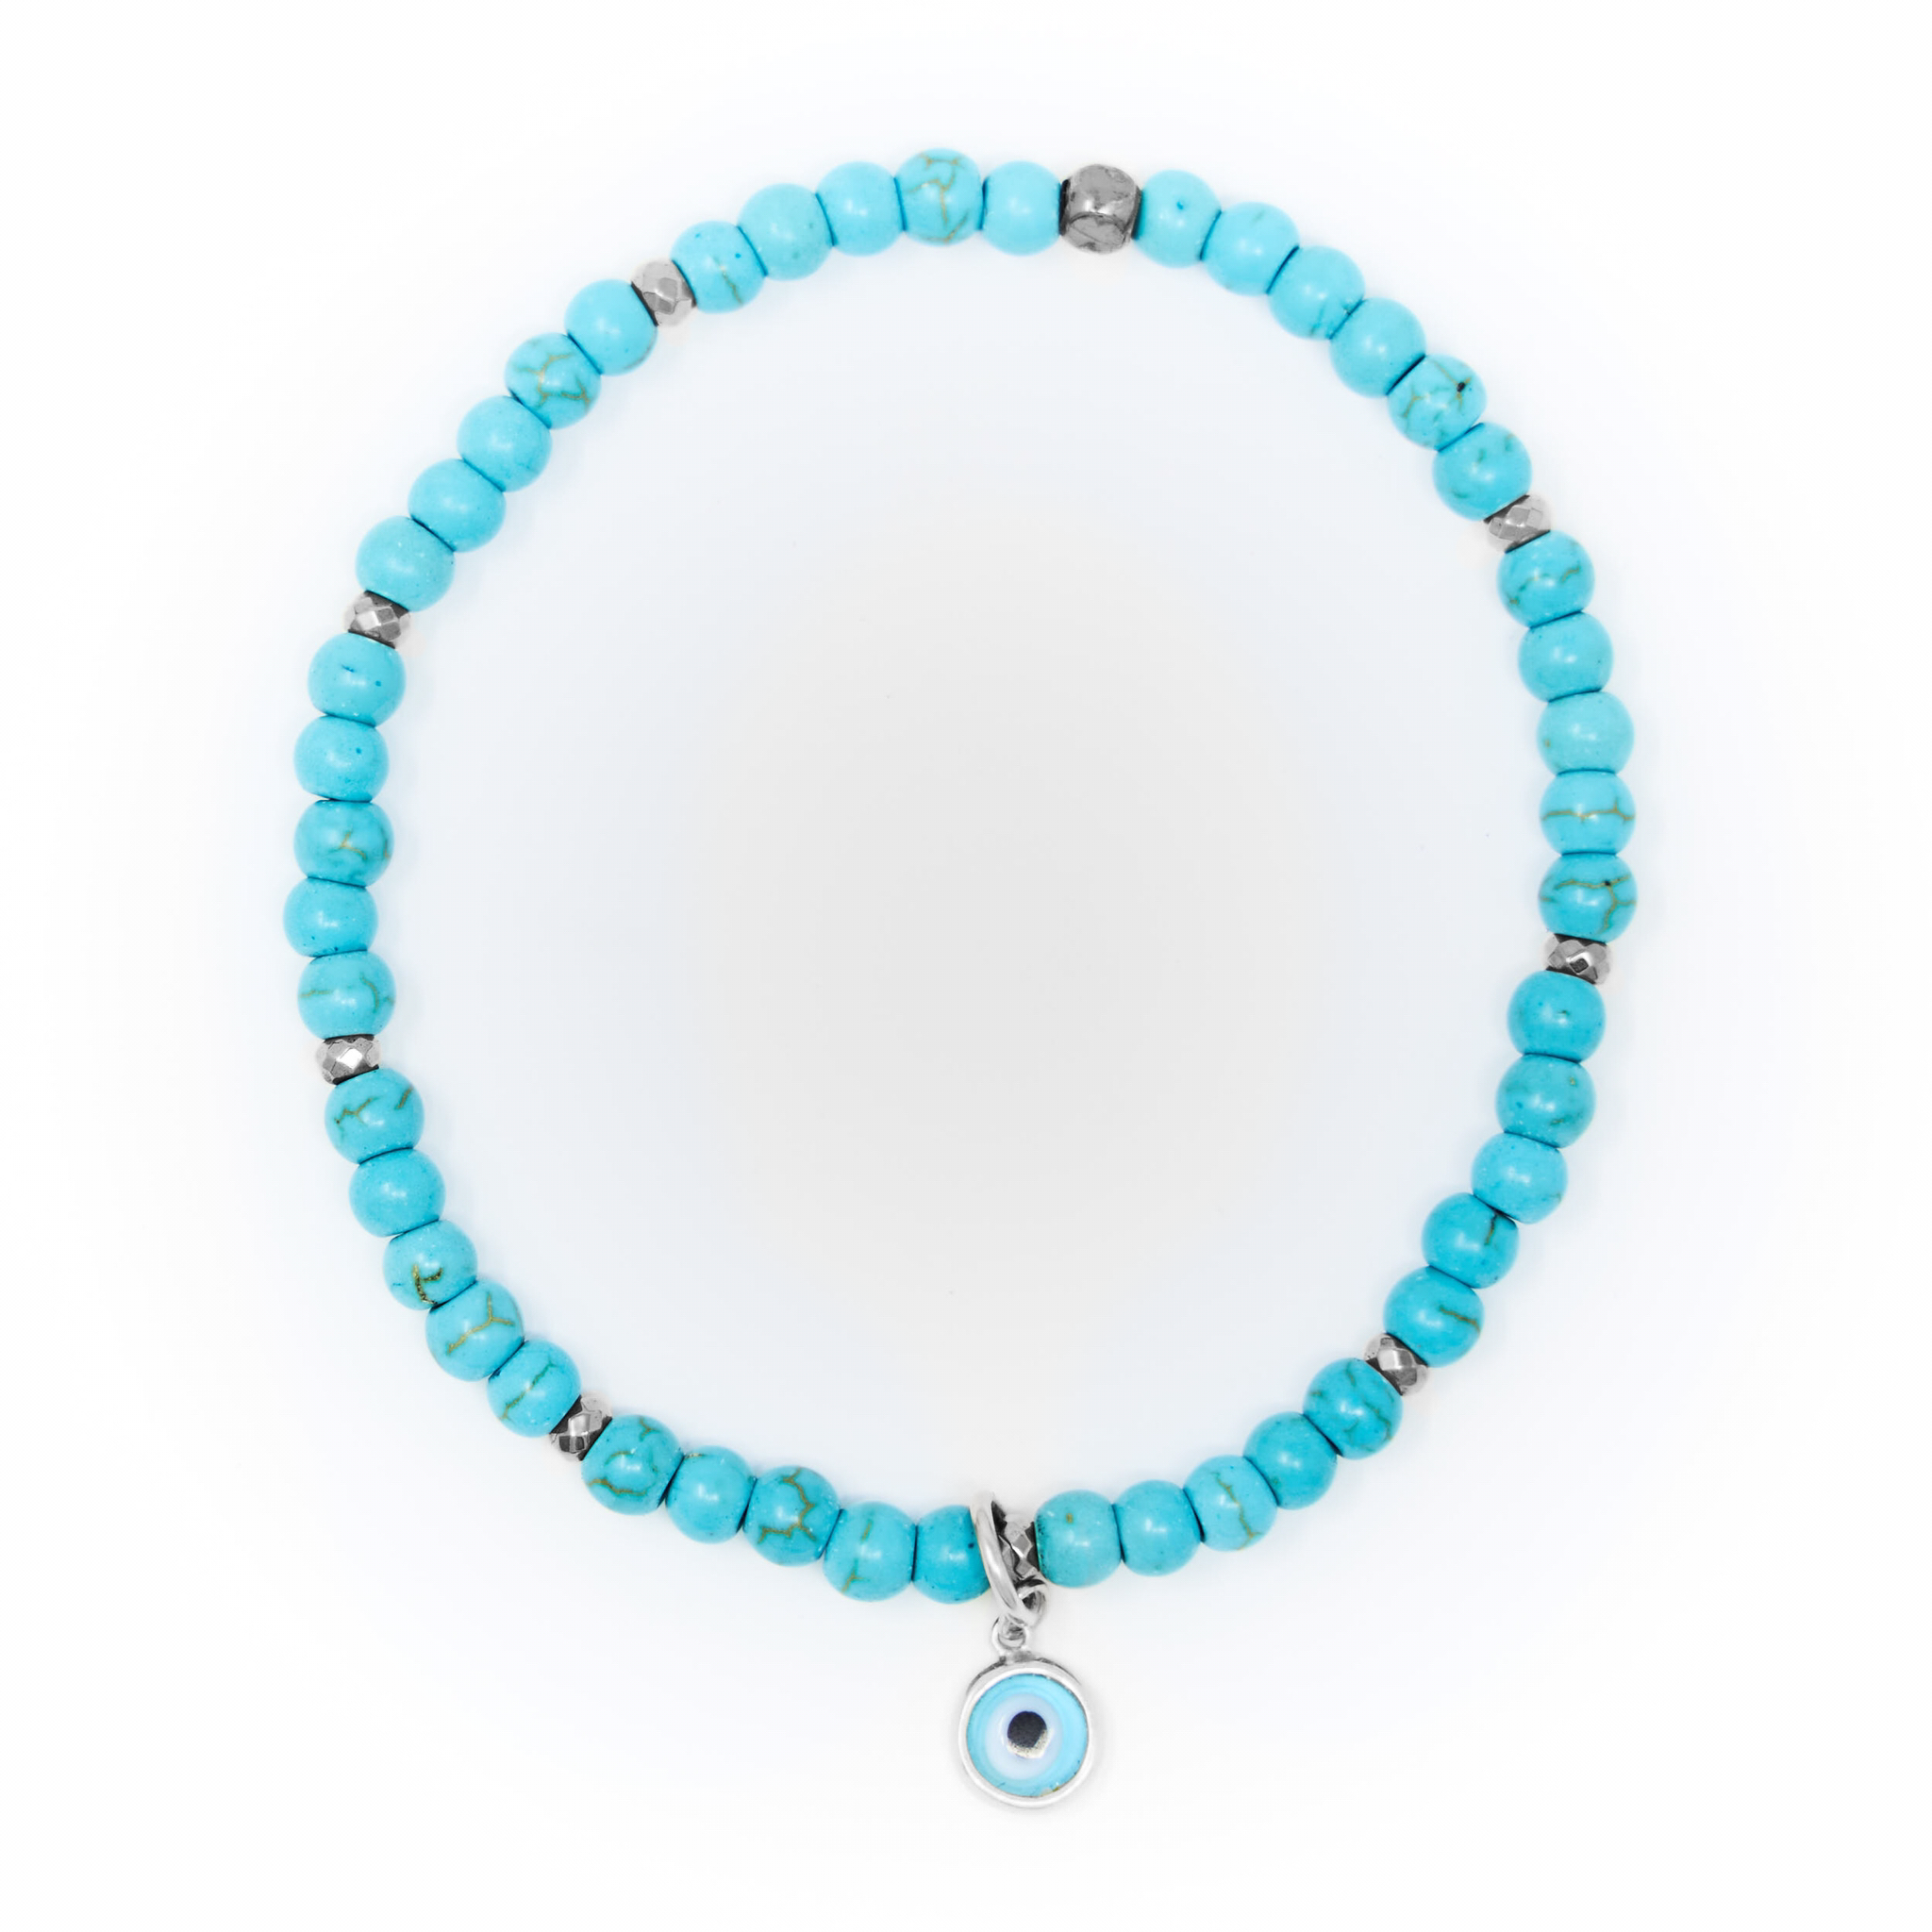 Turquoise Matte with Silver Bracelet, Silver Blue Evil Eye Charm